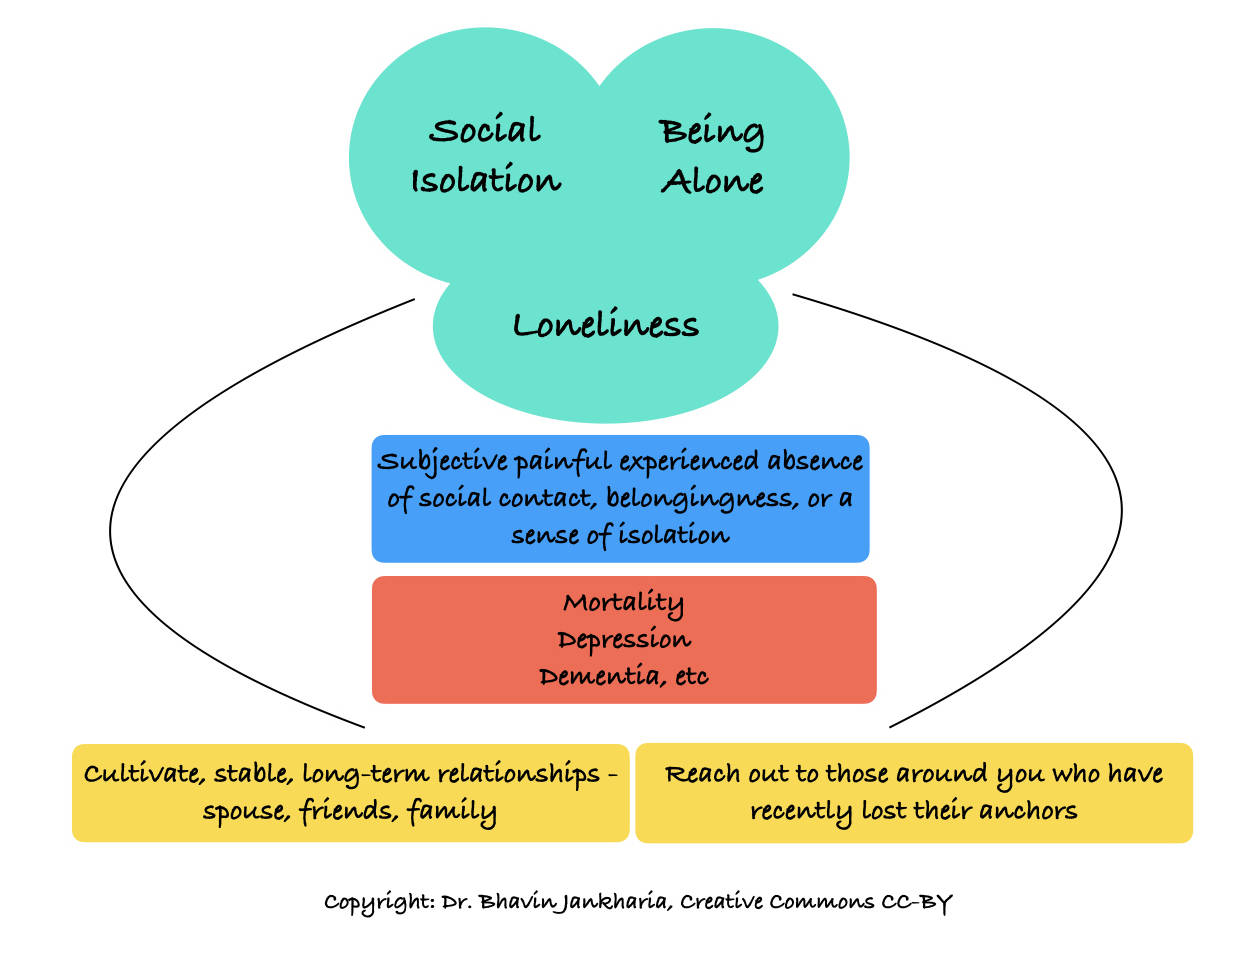 I'm Feeling Lonely: What is the Psychological Impact of Loneliness?